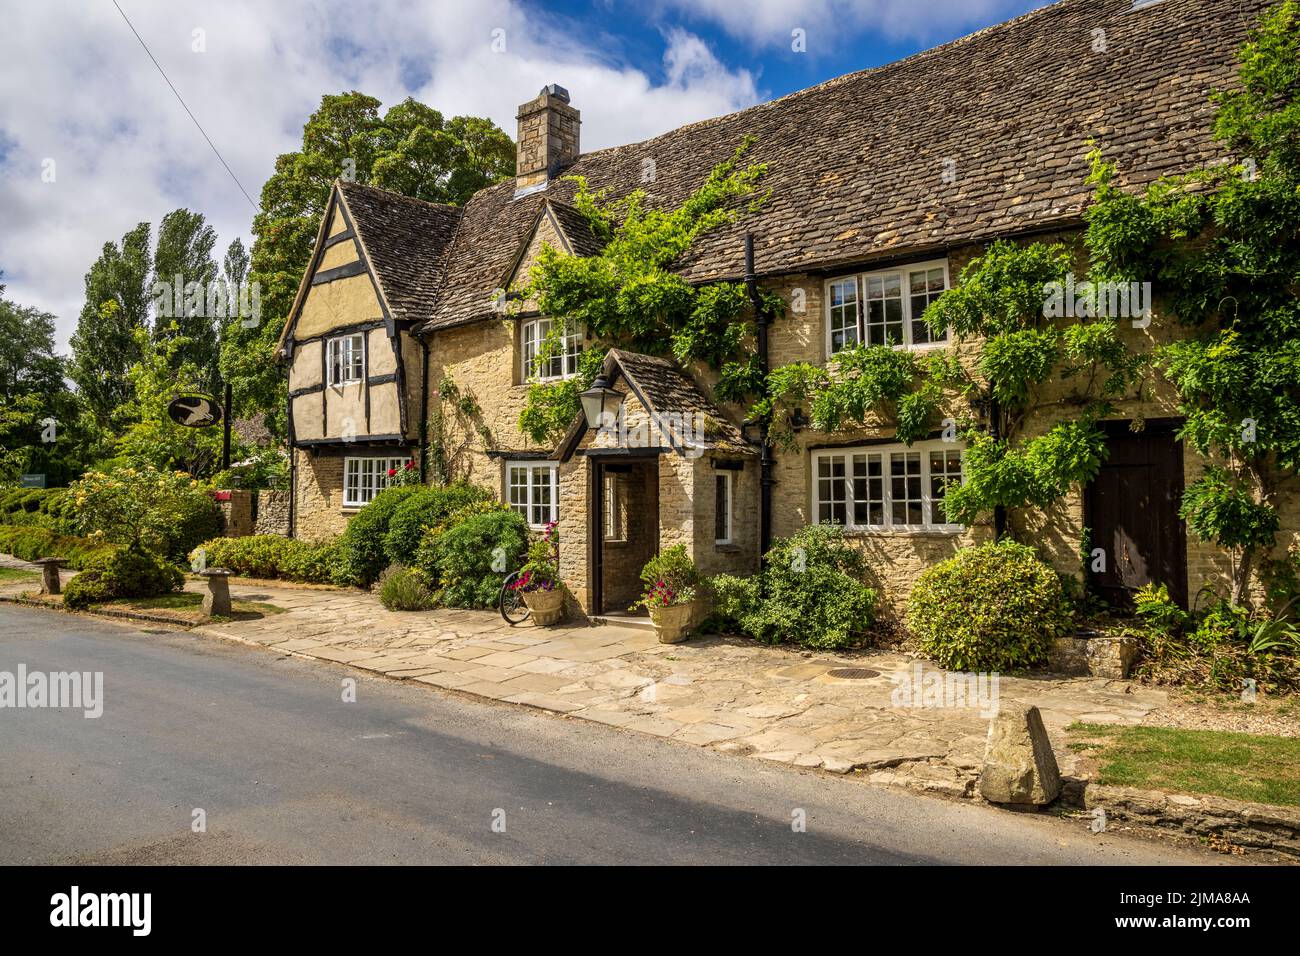 The Old Swan im Minster Lovell in den Cotswolds, Oxfordshire, England Stockfoto